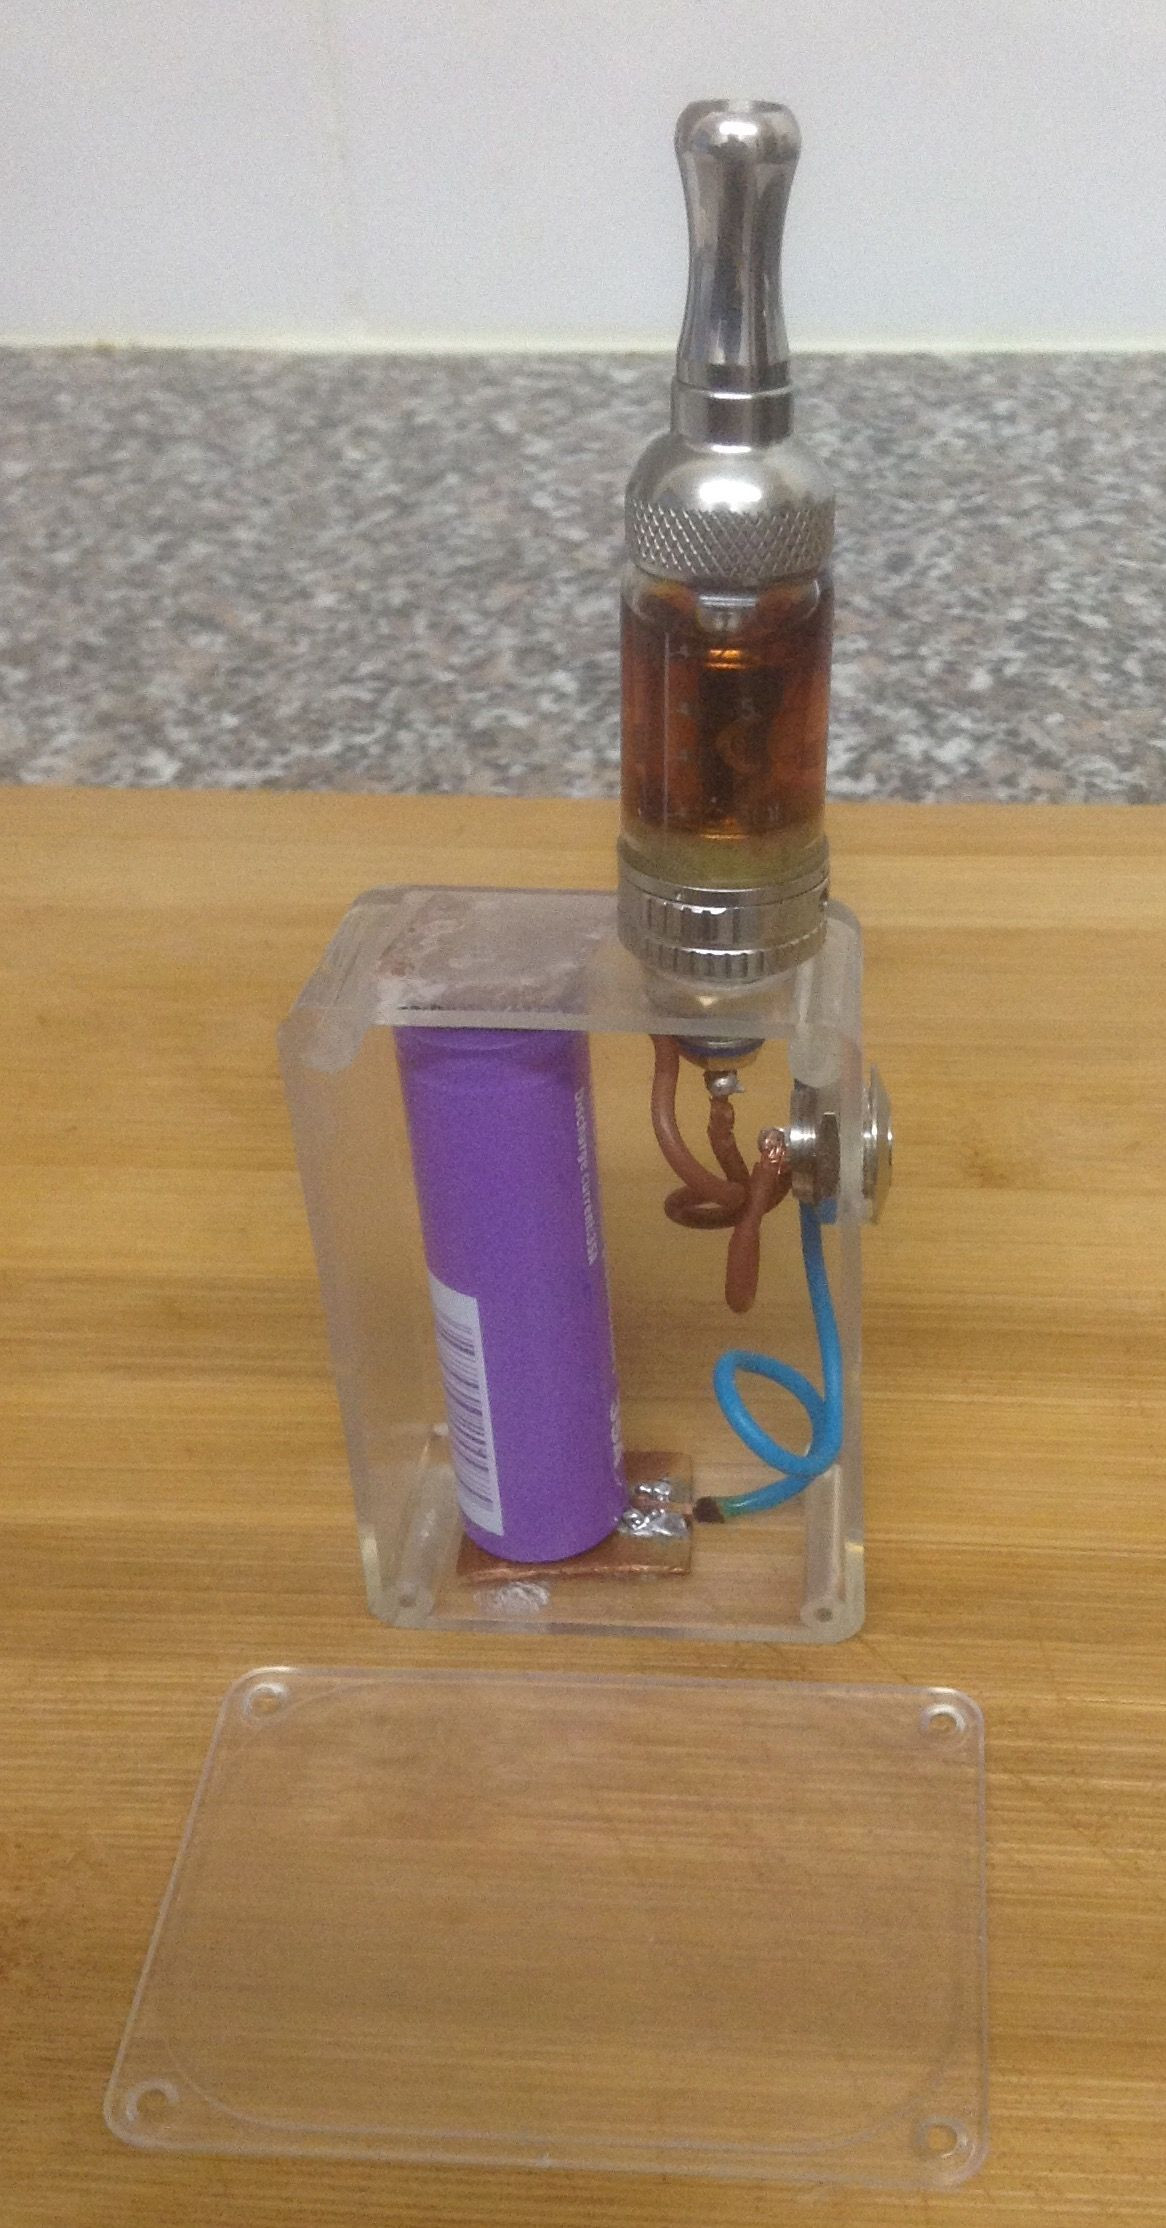 DIY Box Mods Parts
 Homemade unregulated single box mod made with